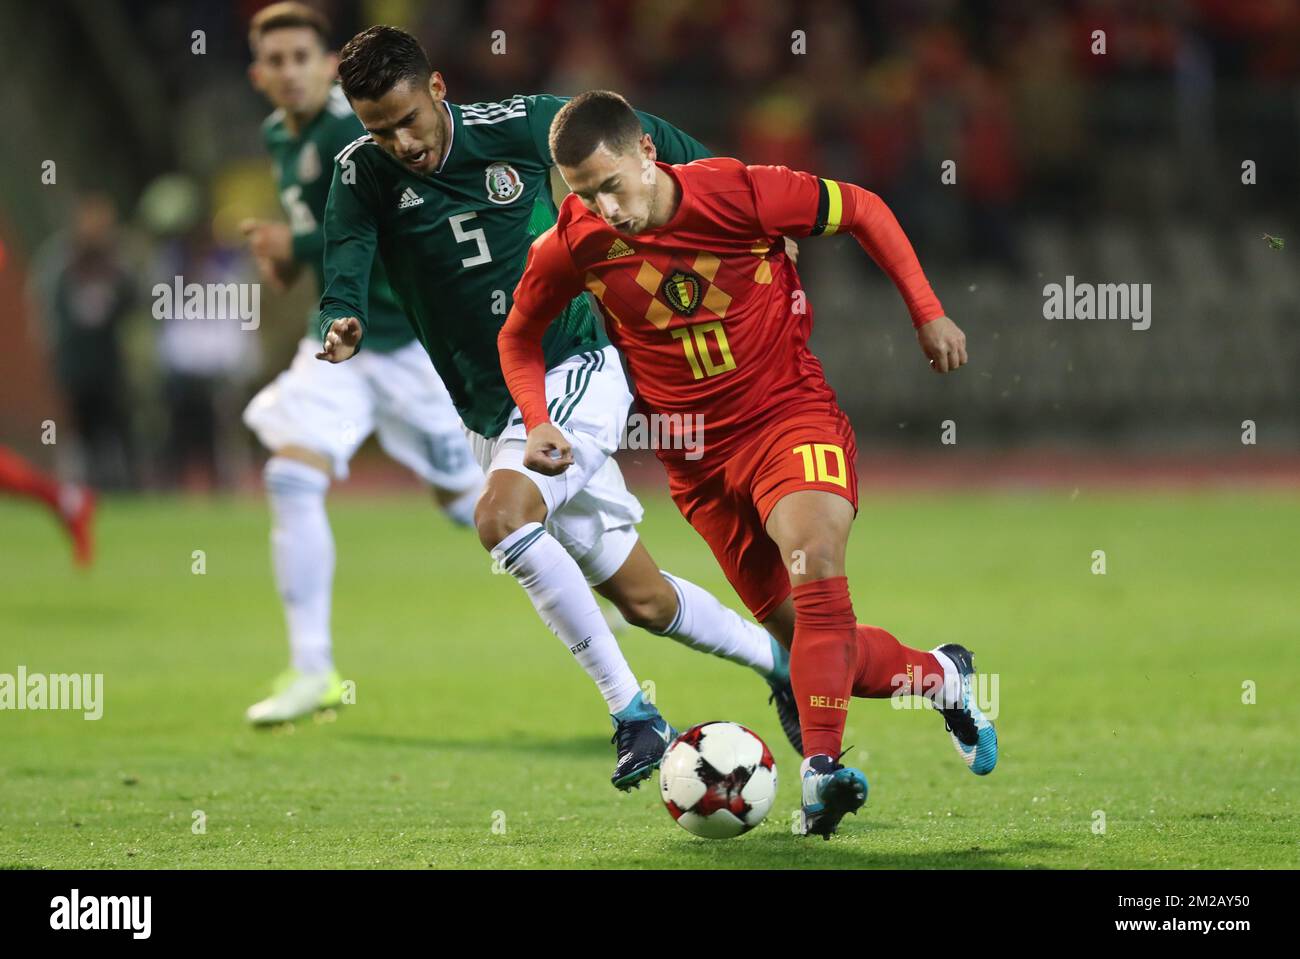 Mexico's Diego Reyes and Belgium's Eden Hazard fight for the ball during a soccer game between AFC Tubize and Lierse SK, in Tubize, Saturday 11 November 2017, on day 15 of the division 1B Proximus League competition of the Belgian soccer championship. BELGA PHOTO VIRGINIE LEFOUR Stock Photo